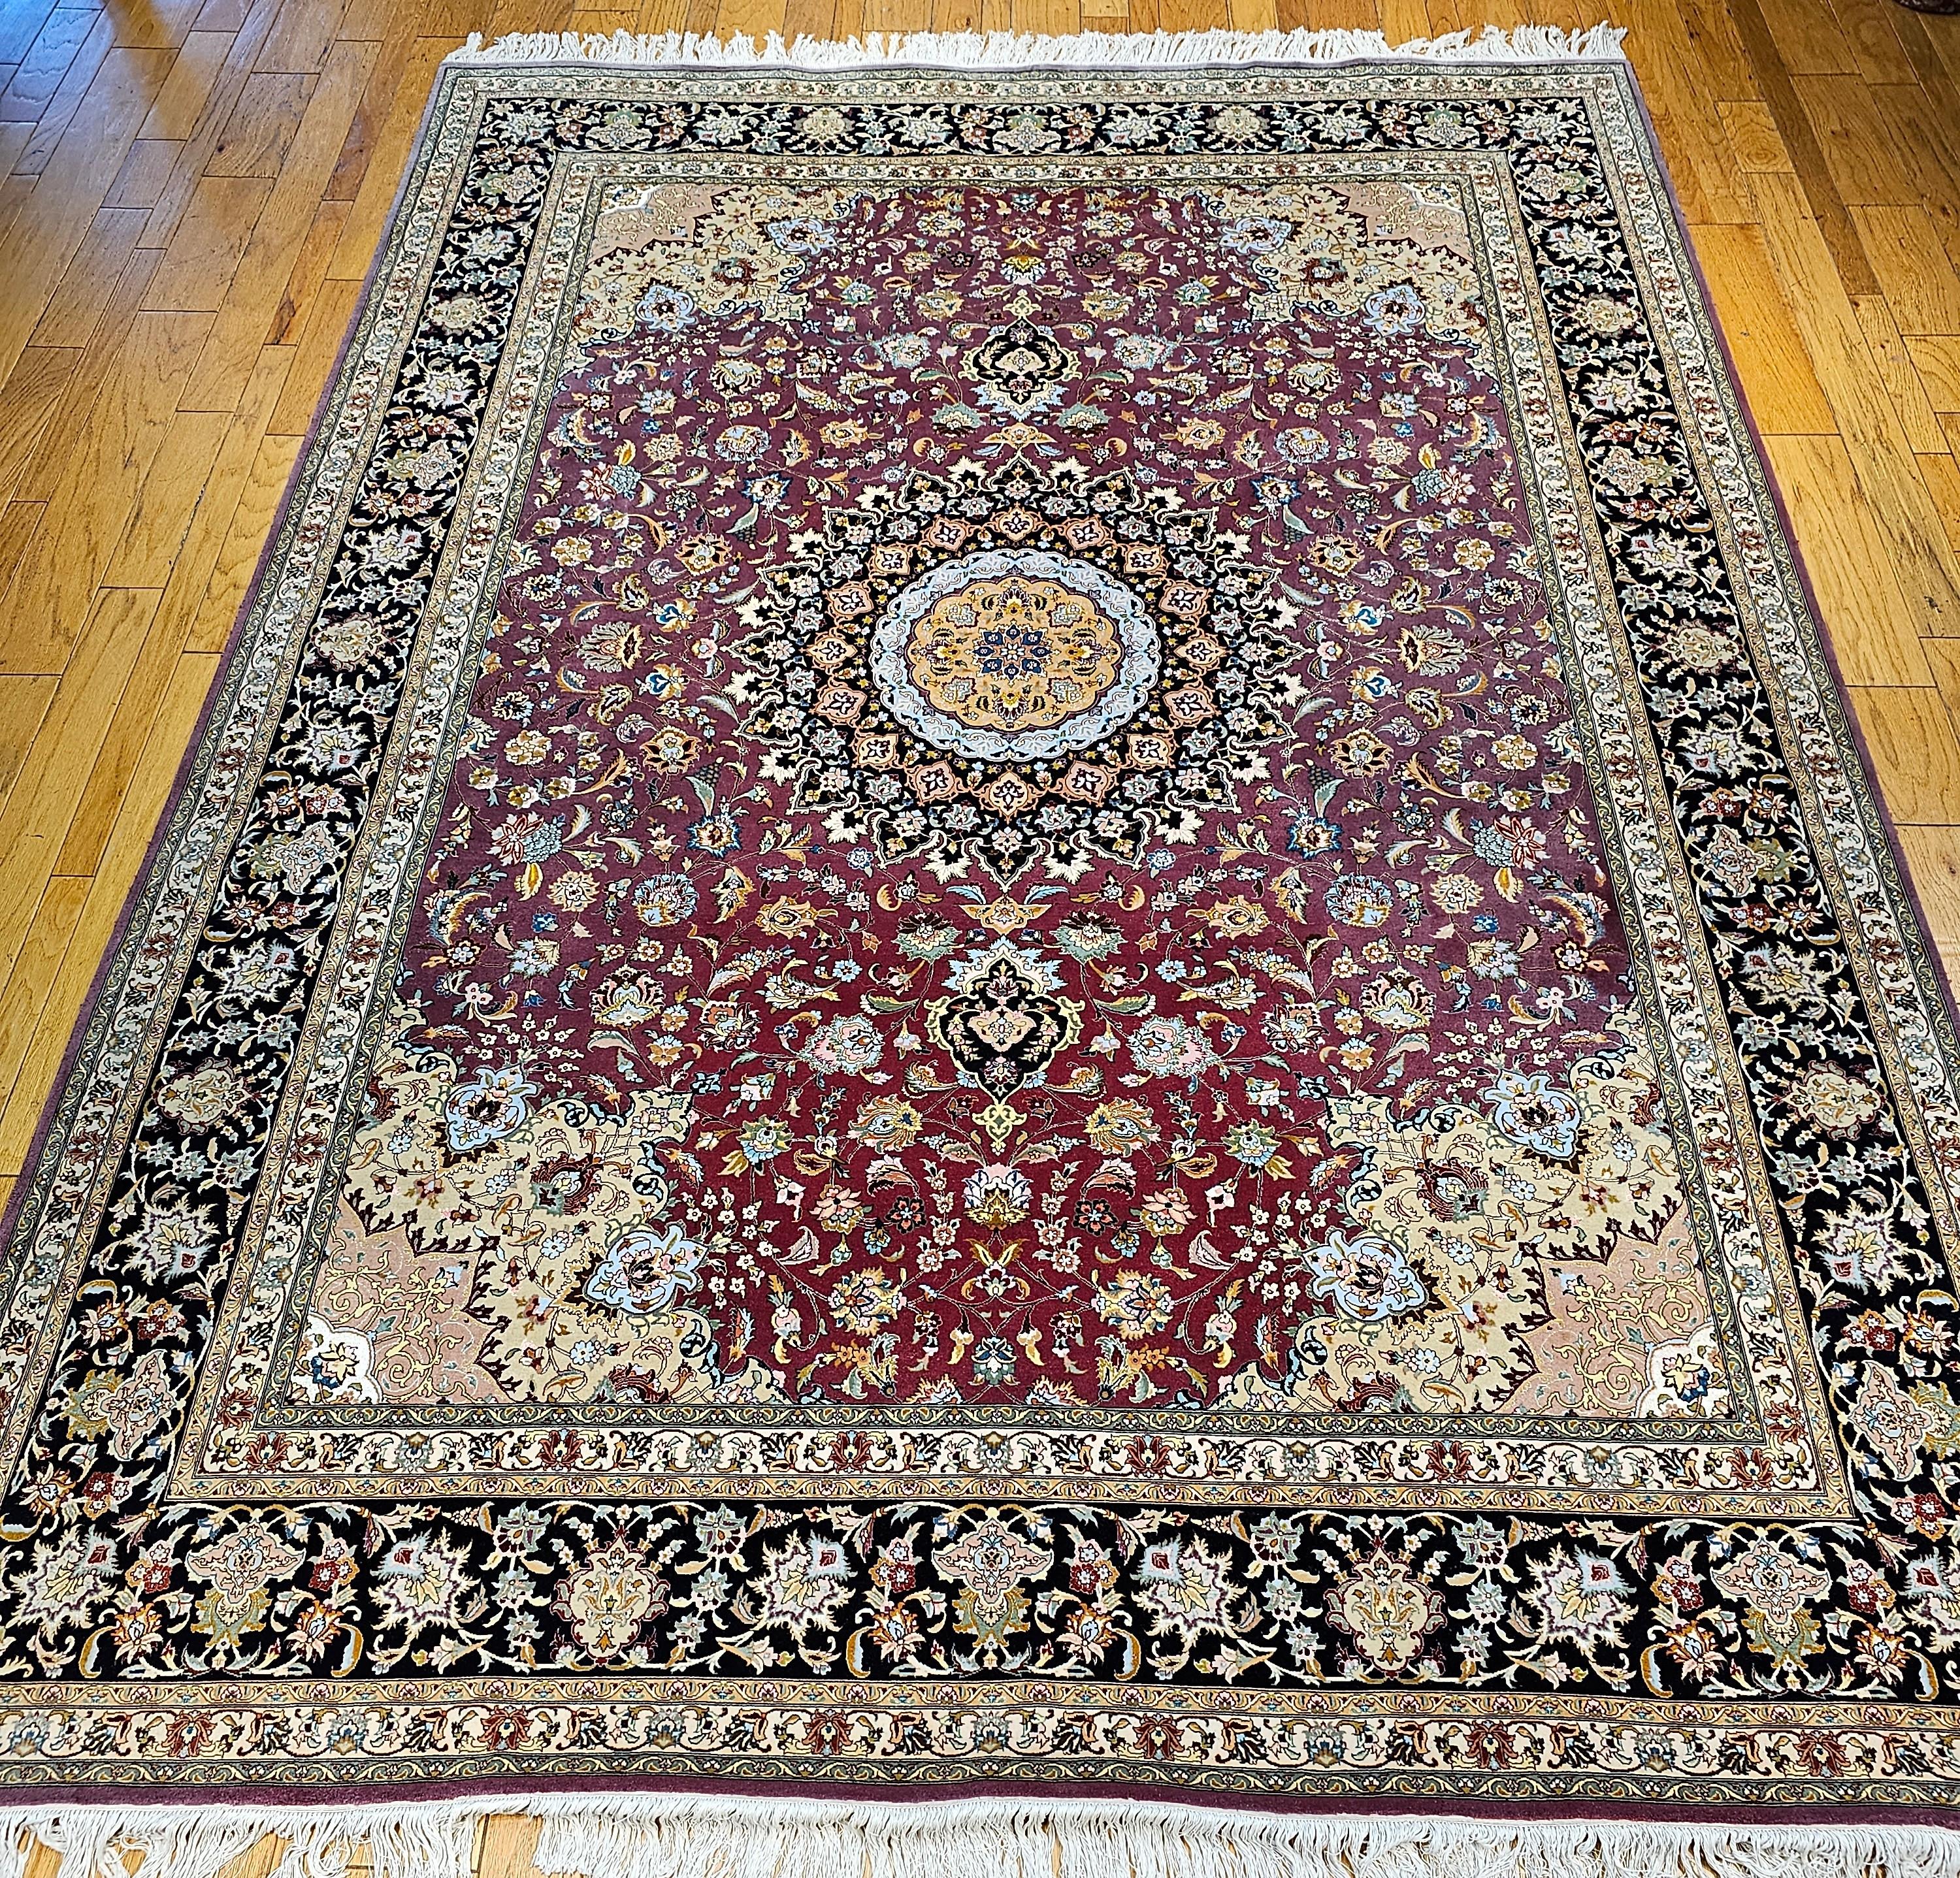 A very fine weave hand-knotted Persian Tabriz room-size rug was very finely woven in one of the best workshops in the City of Tabriz in the 4th quarter of the 1900s.   This Tabriz rug has a beautiful floral design set in a rich burgundy or pale plum